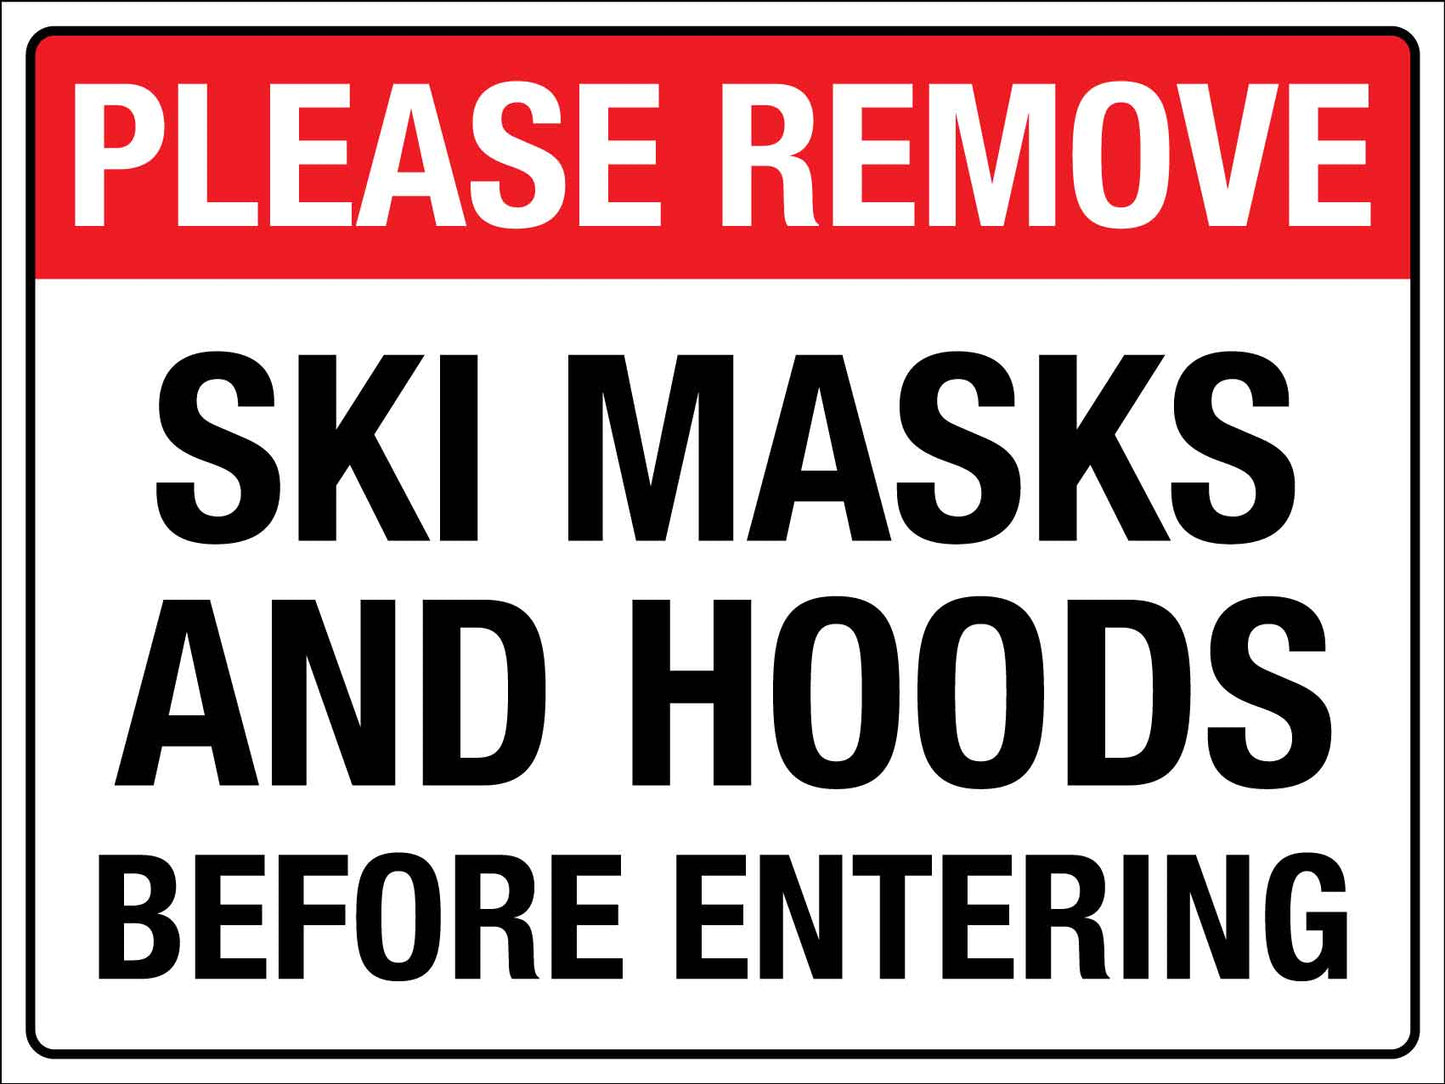 Please Remove Ski Masks and Hoods Before Entering Sign